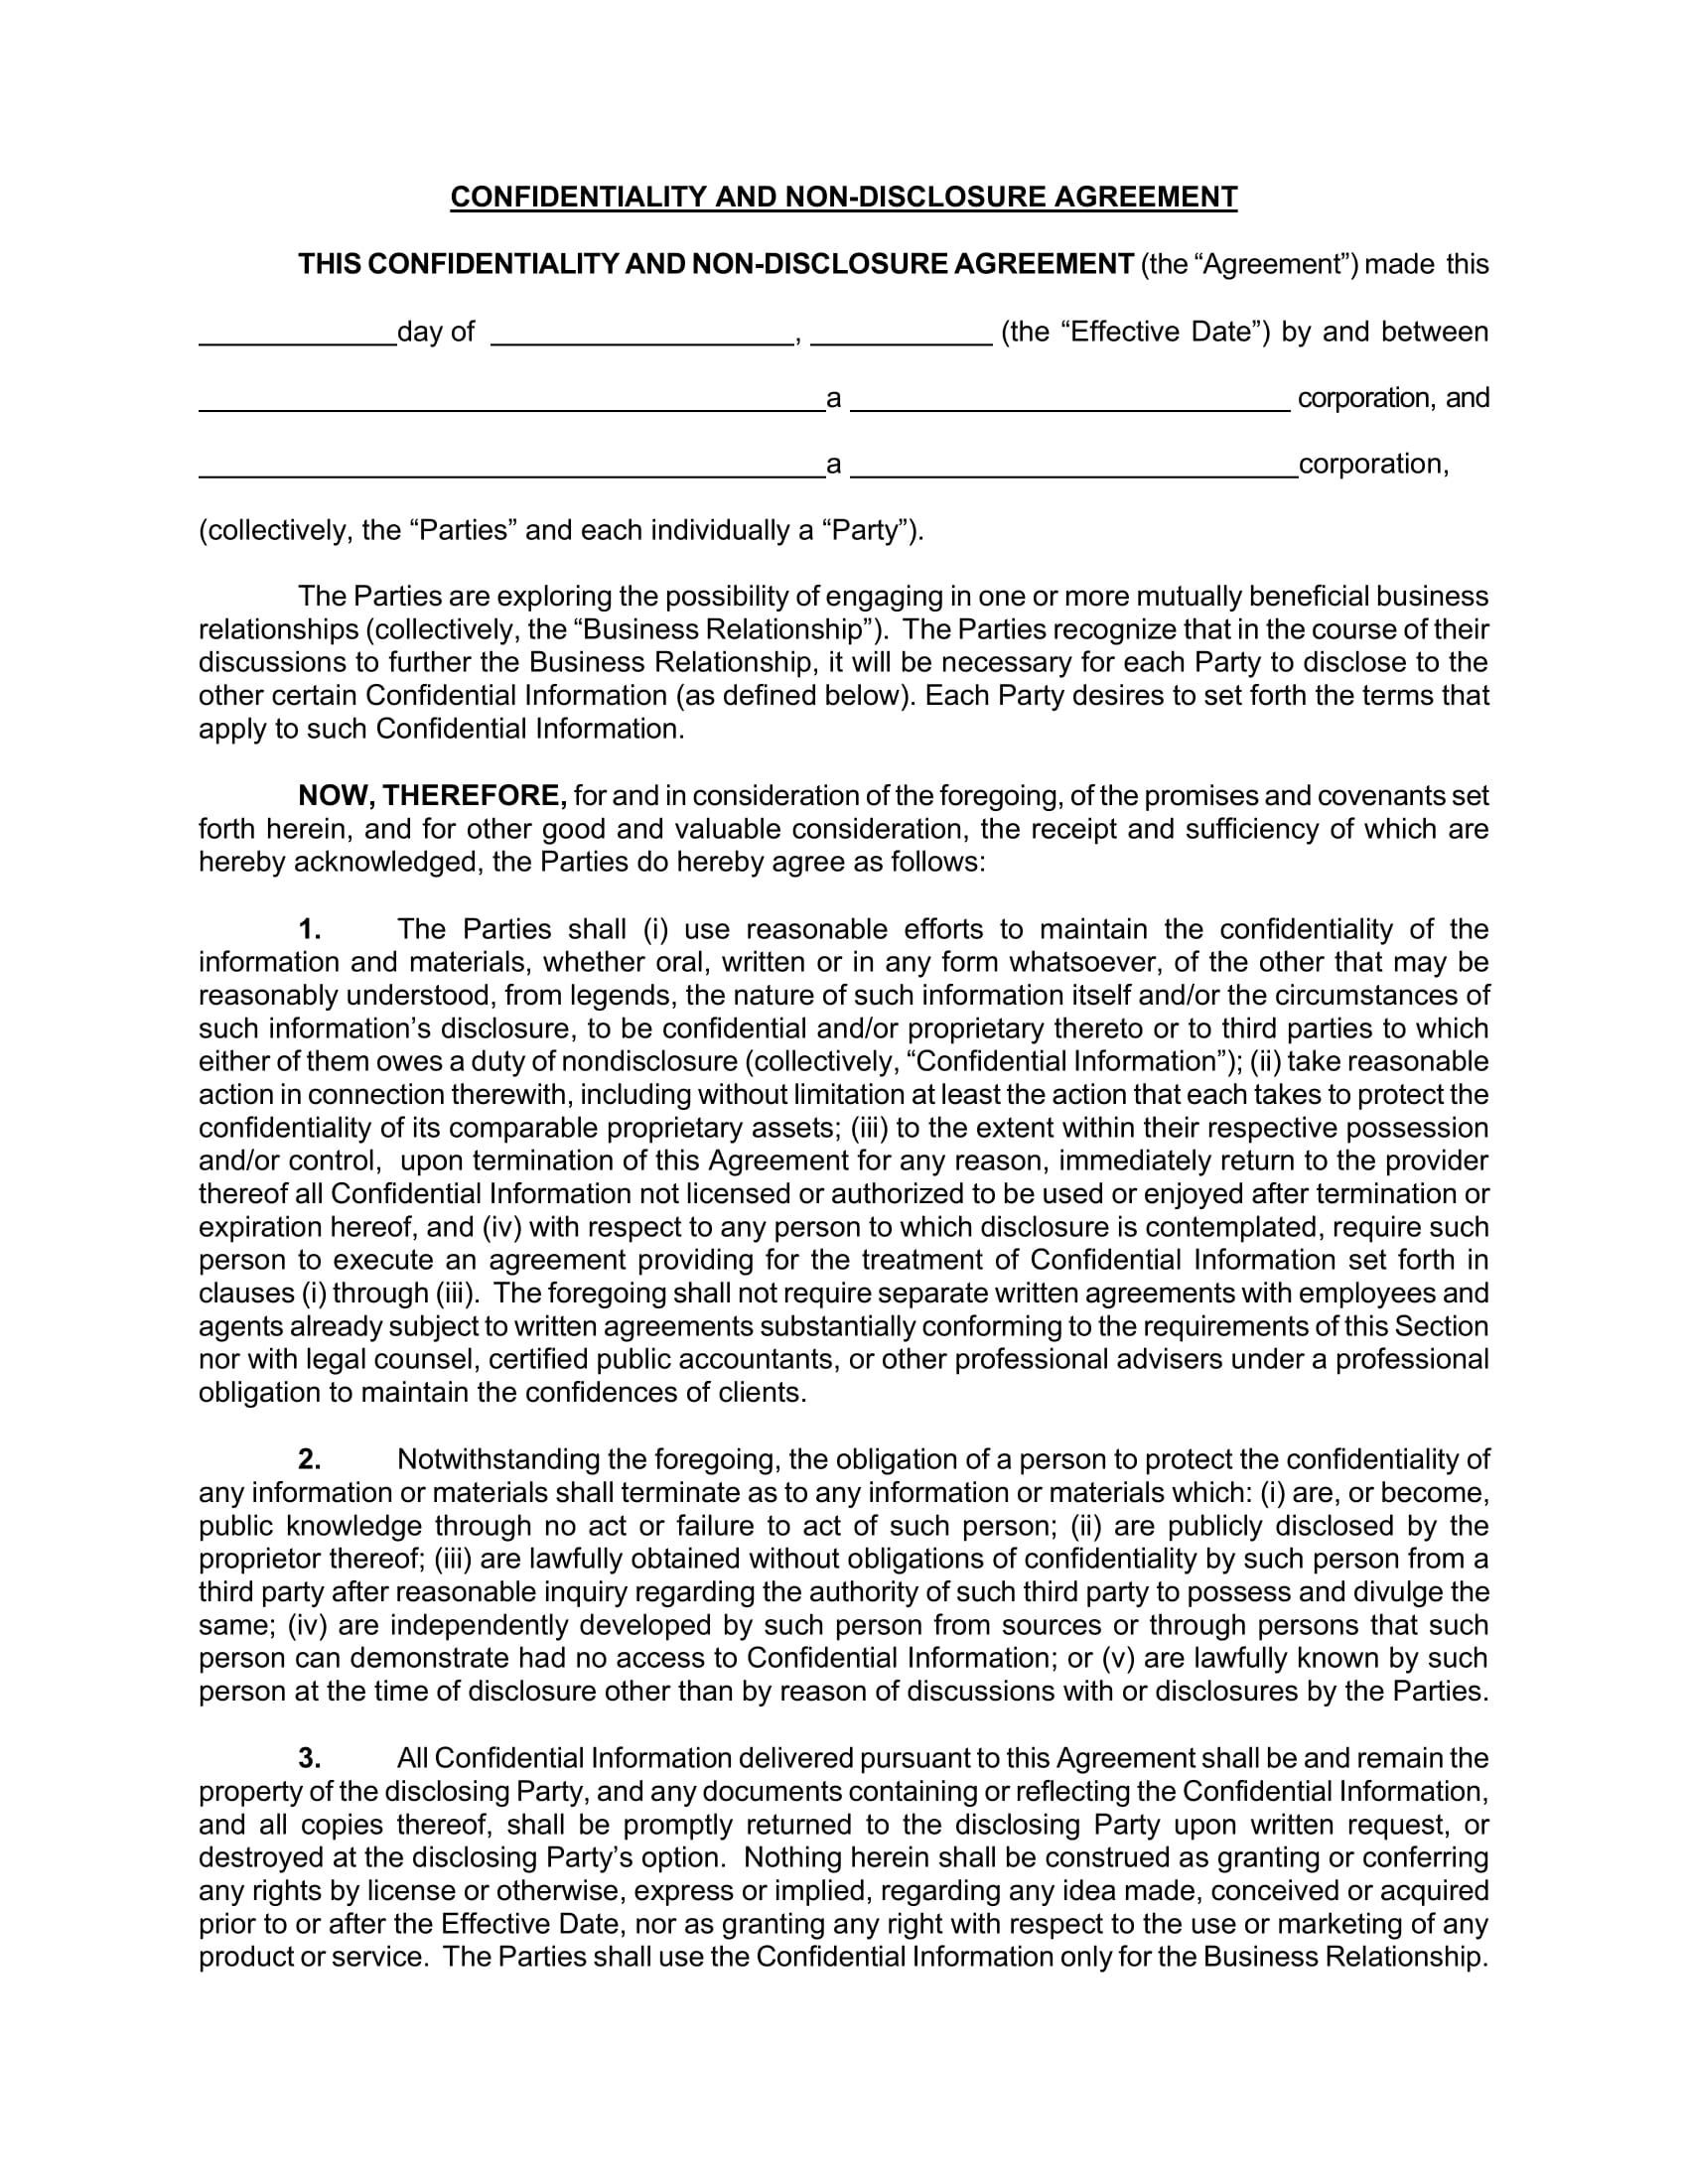 21+ Bookkeeper Confidentiality Agreement Examples - DOC, PDF Inside accountant confidentiality agreement template